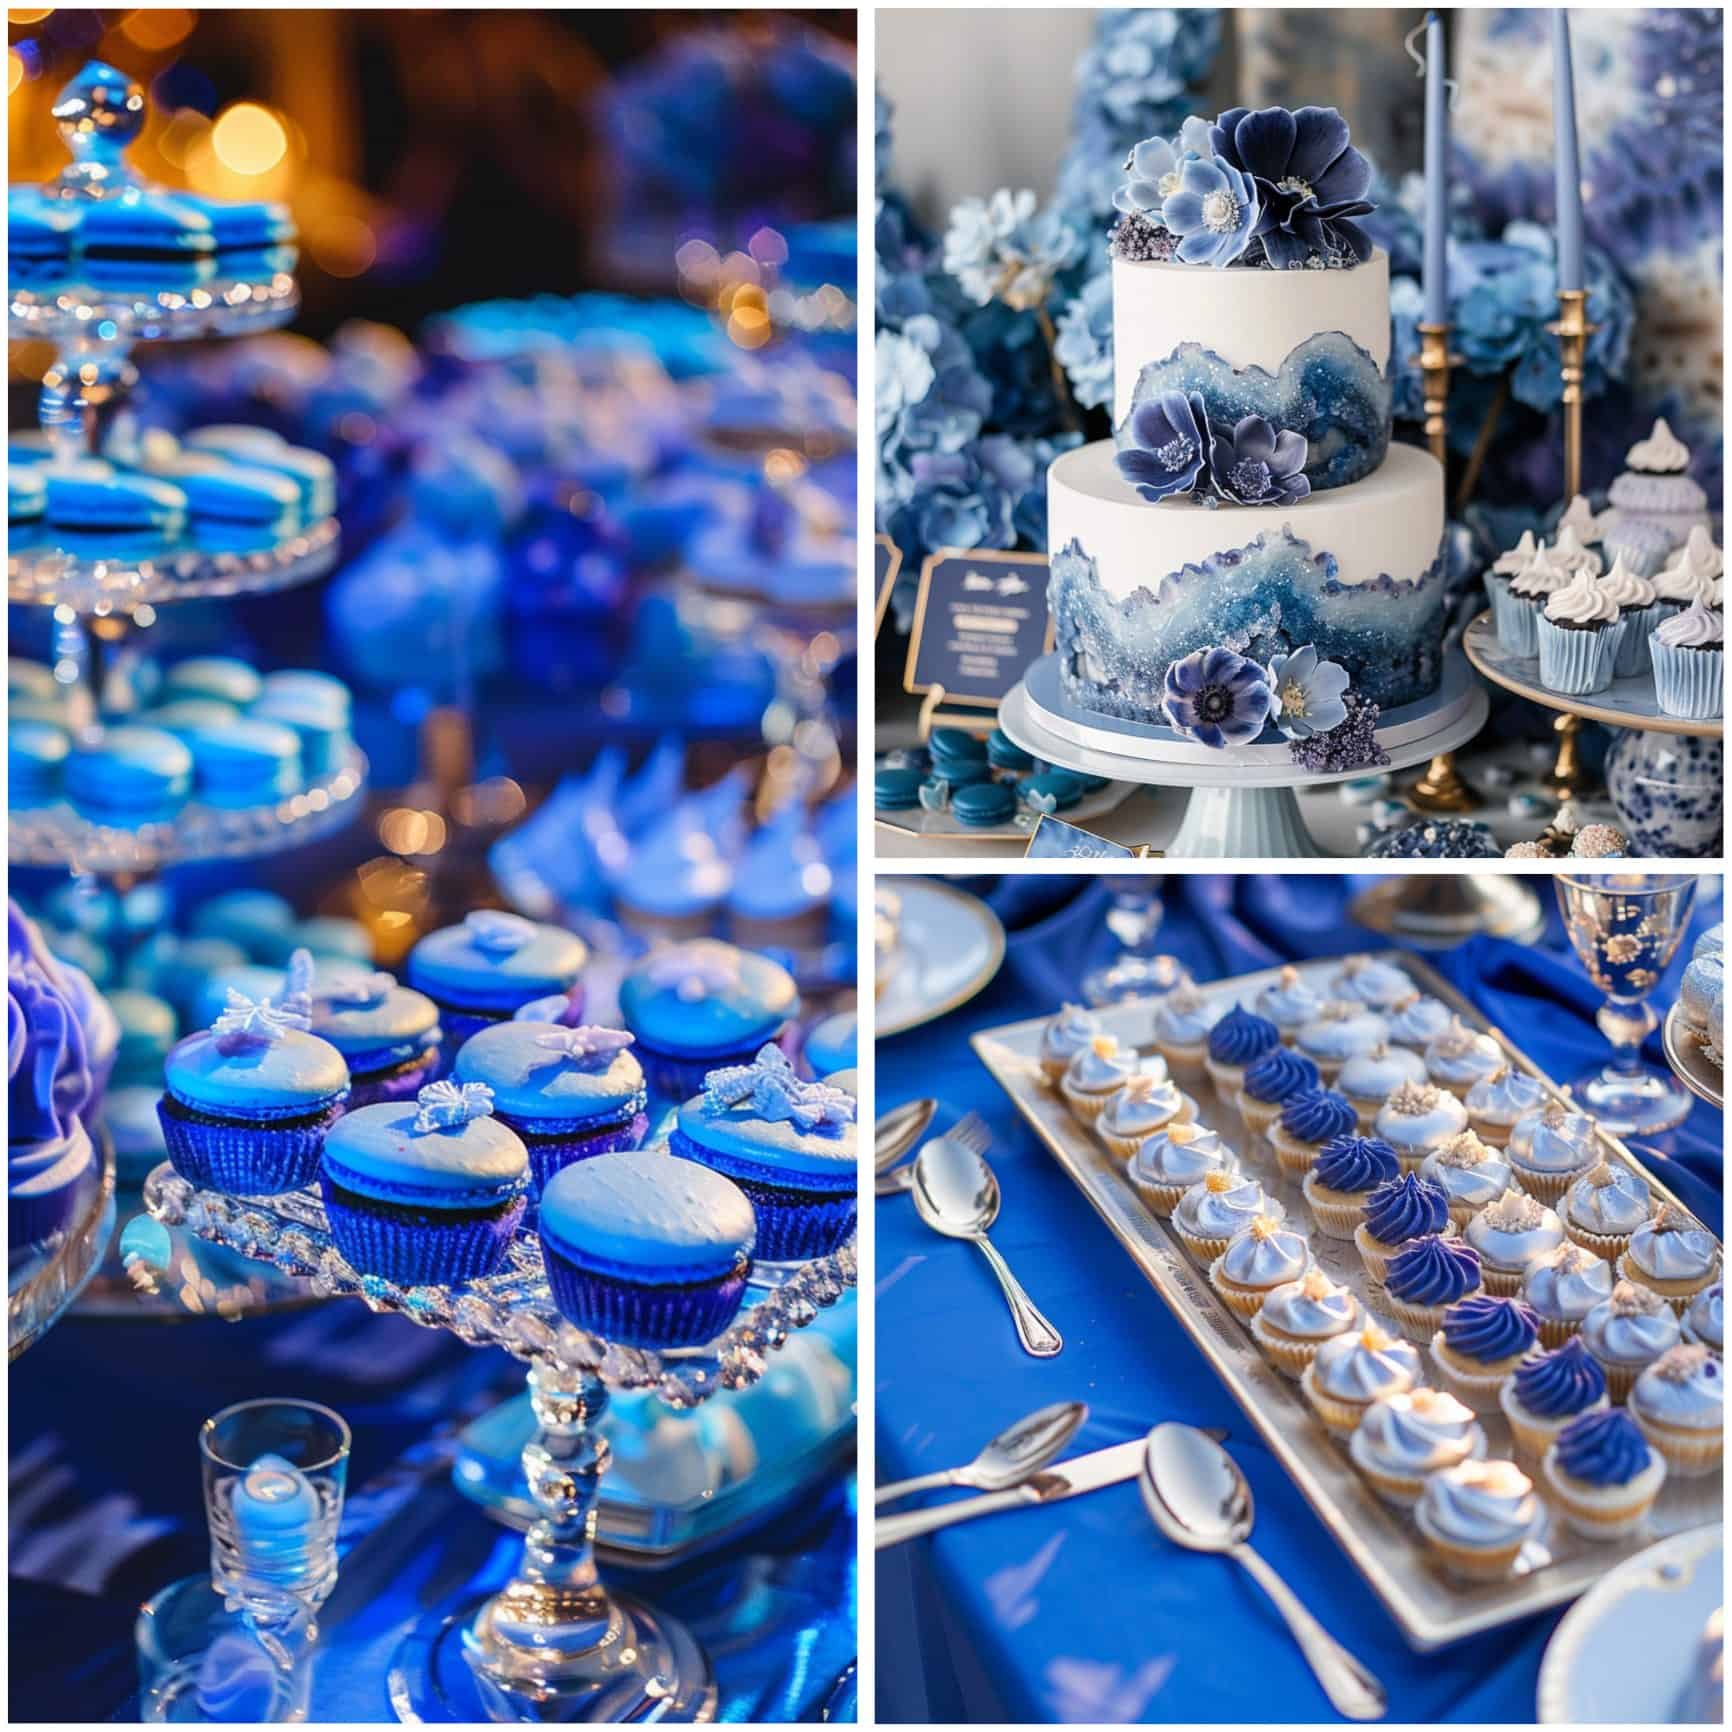 wedding cake and dessert in royal blue